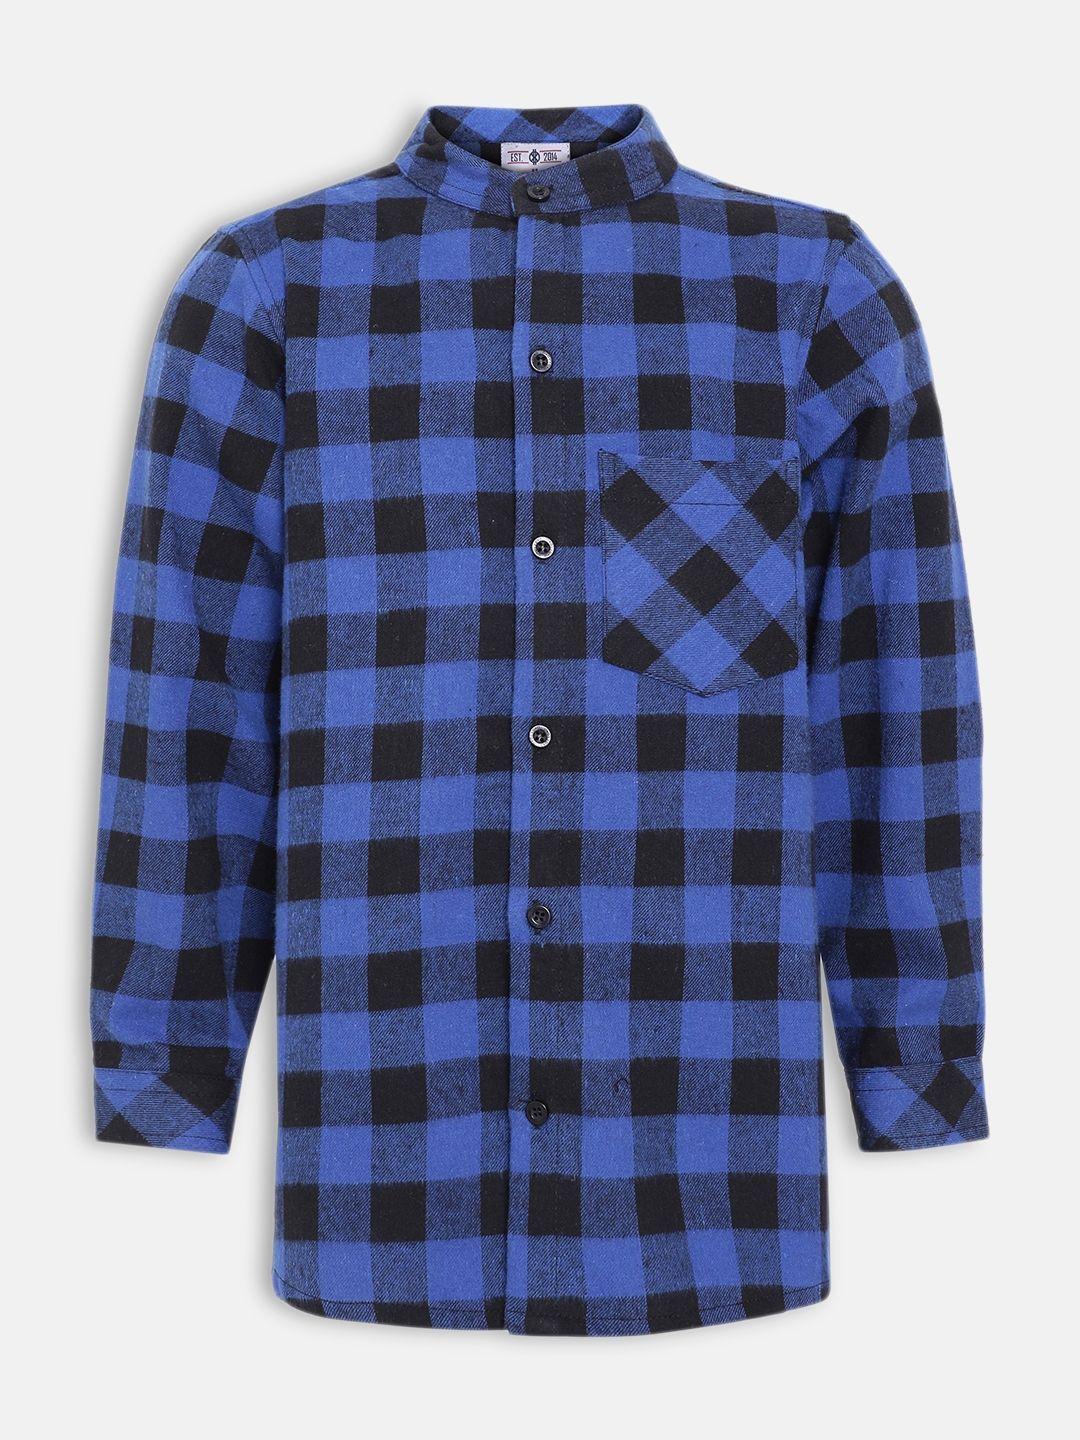 oxolloxo boys blue & black regular fit checked casual shirt